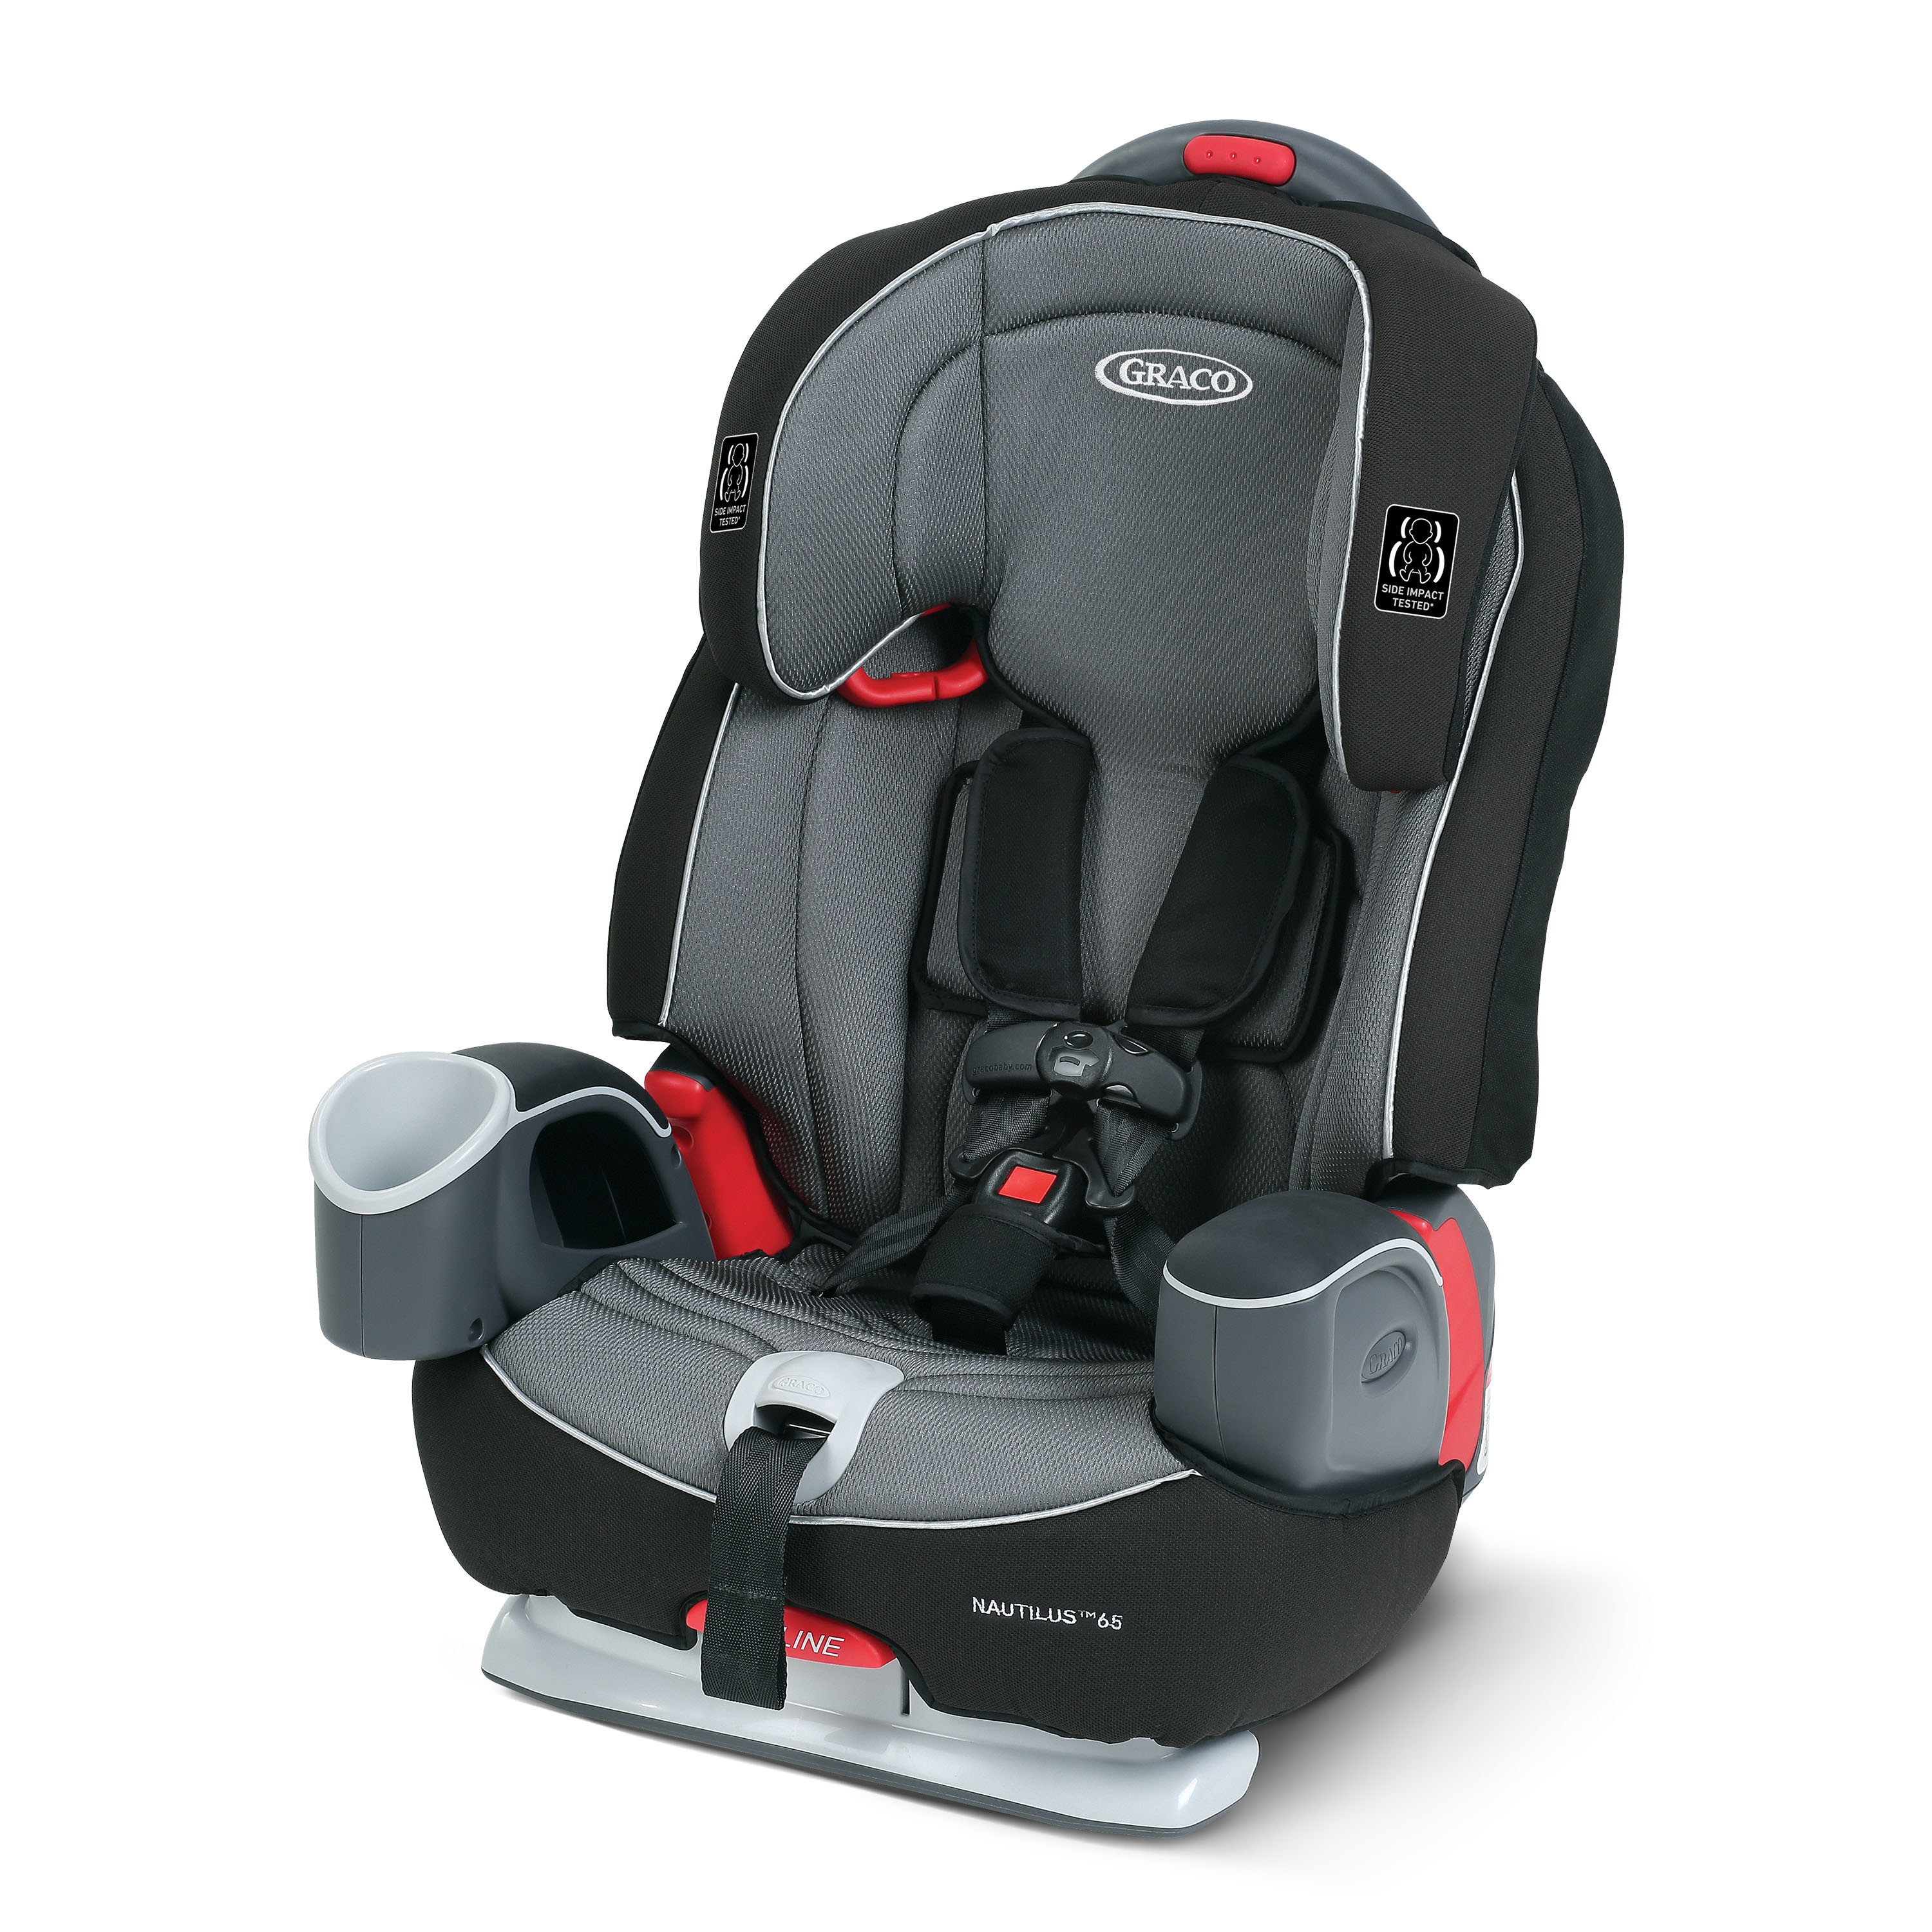 Graco Nautilus 65 3-in-1 Harness Booster Car Seat, Bravo - image 1 of 7